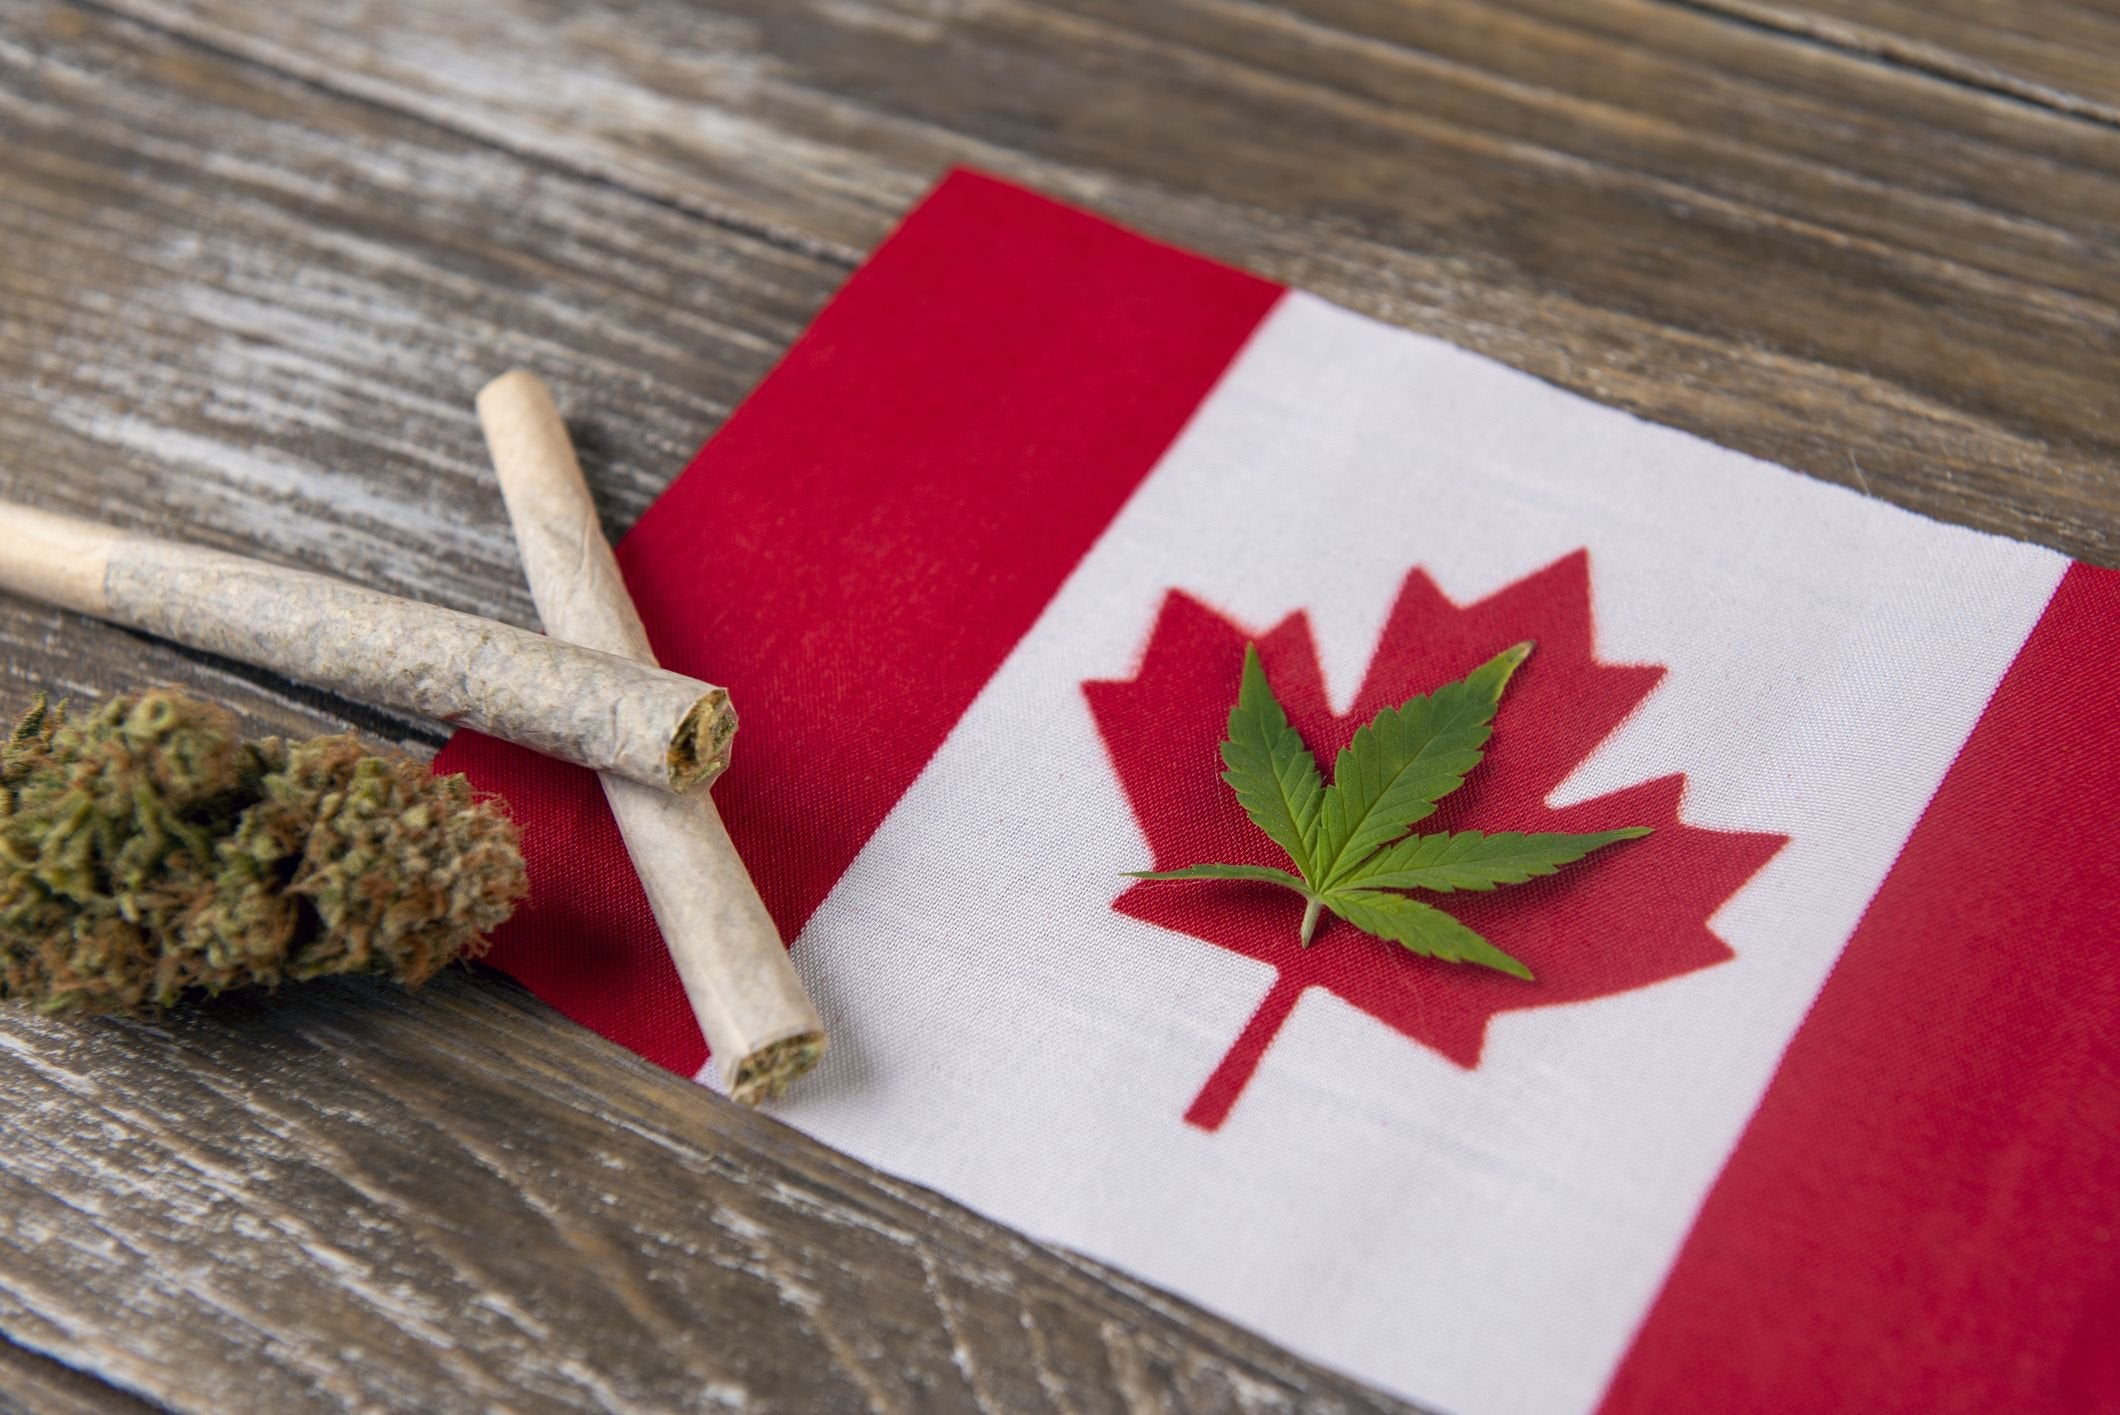 Here's How Much Legal Marijuana Canada Has Sold Since Legalizing Adult-Use Cannabis